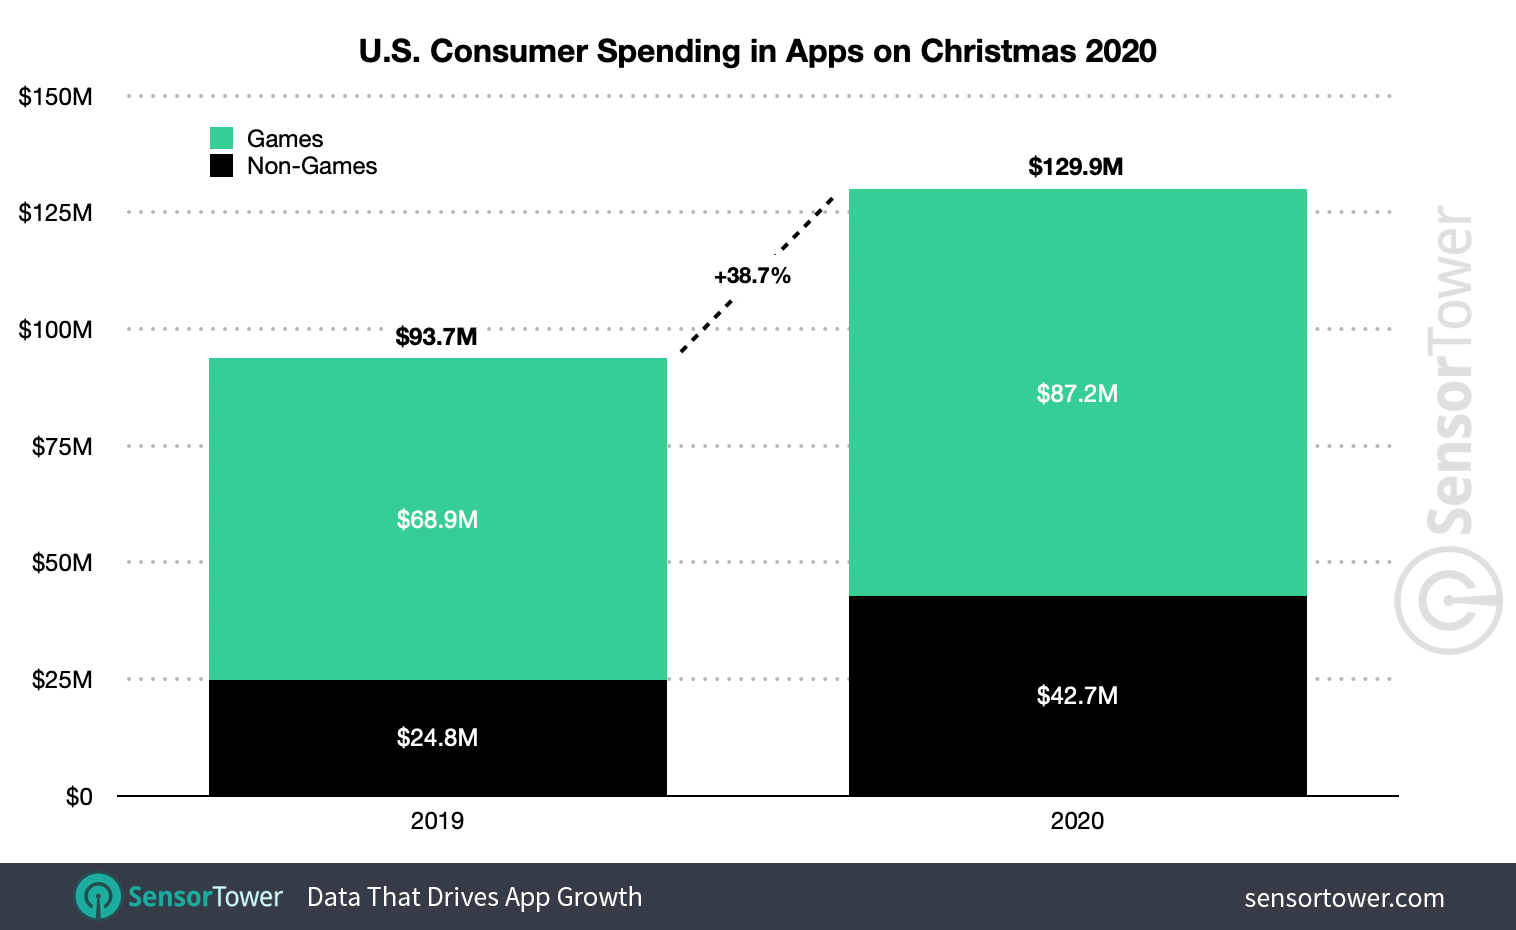 U.S. consumer spending on mobile apps reached nearly $130 million this Christmas.